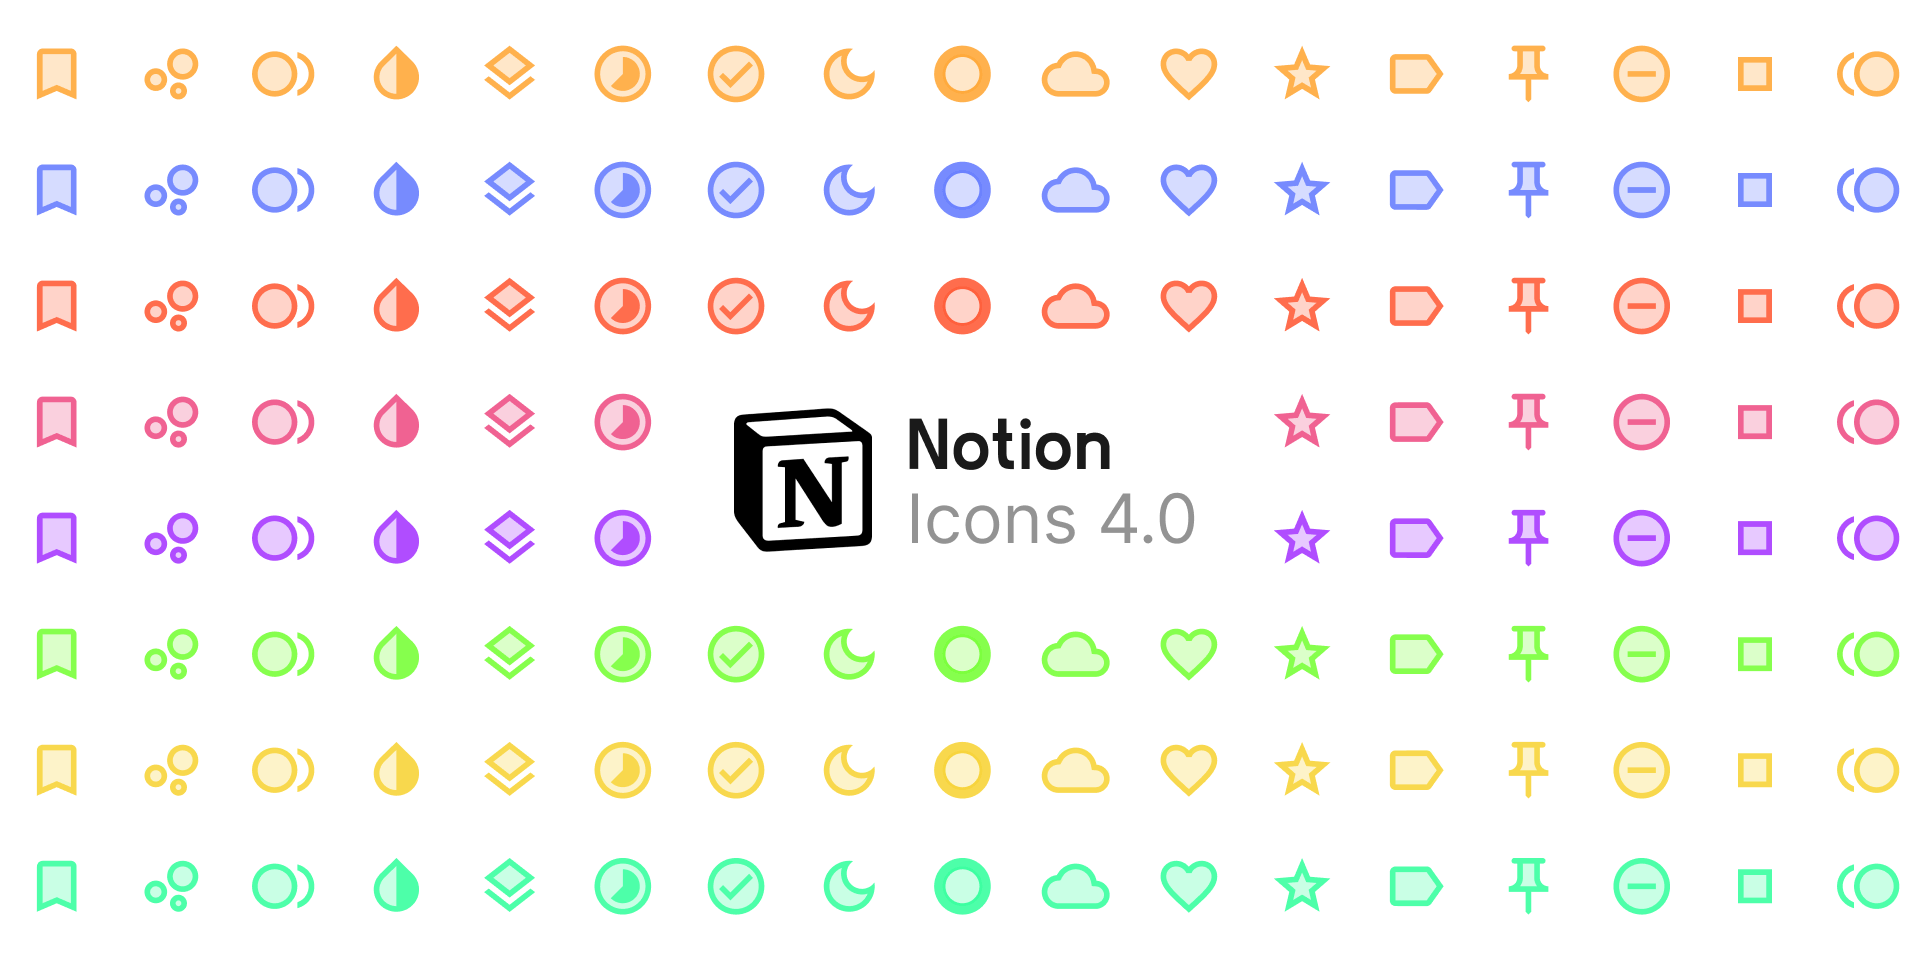 Notion Icons 4.0